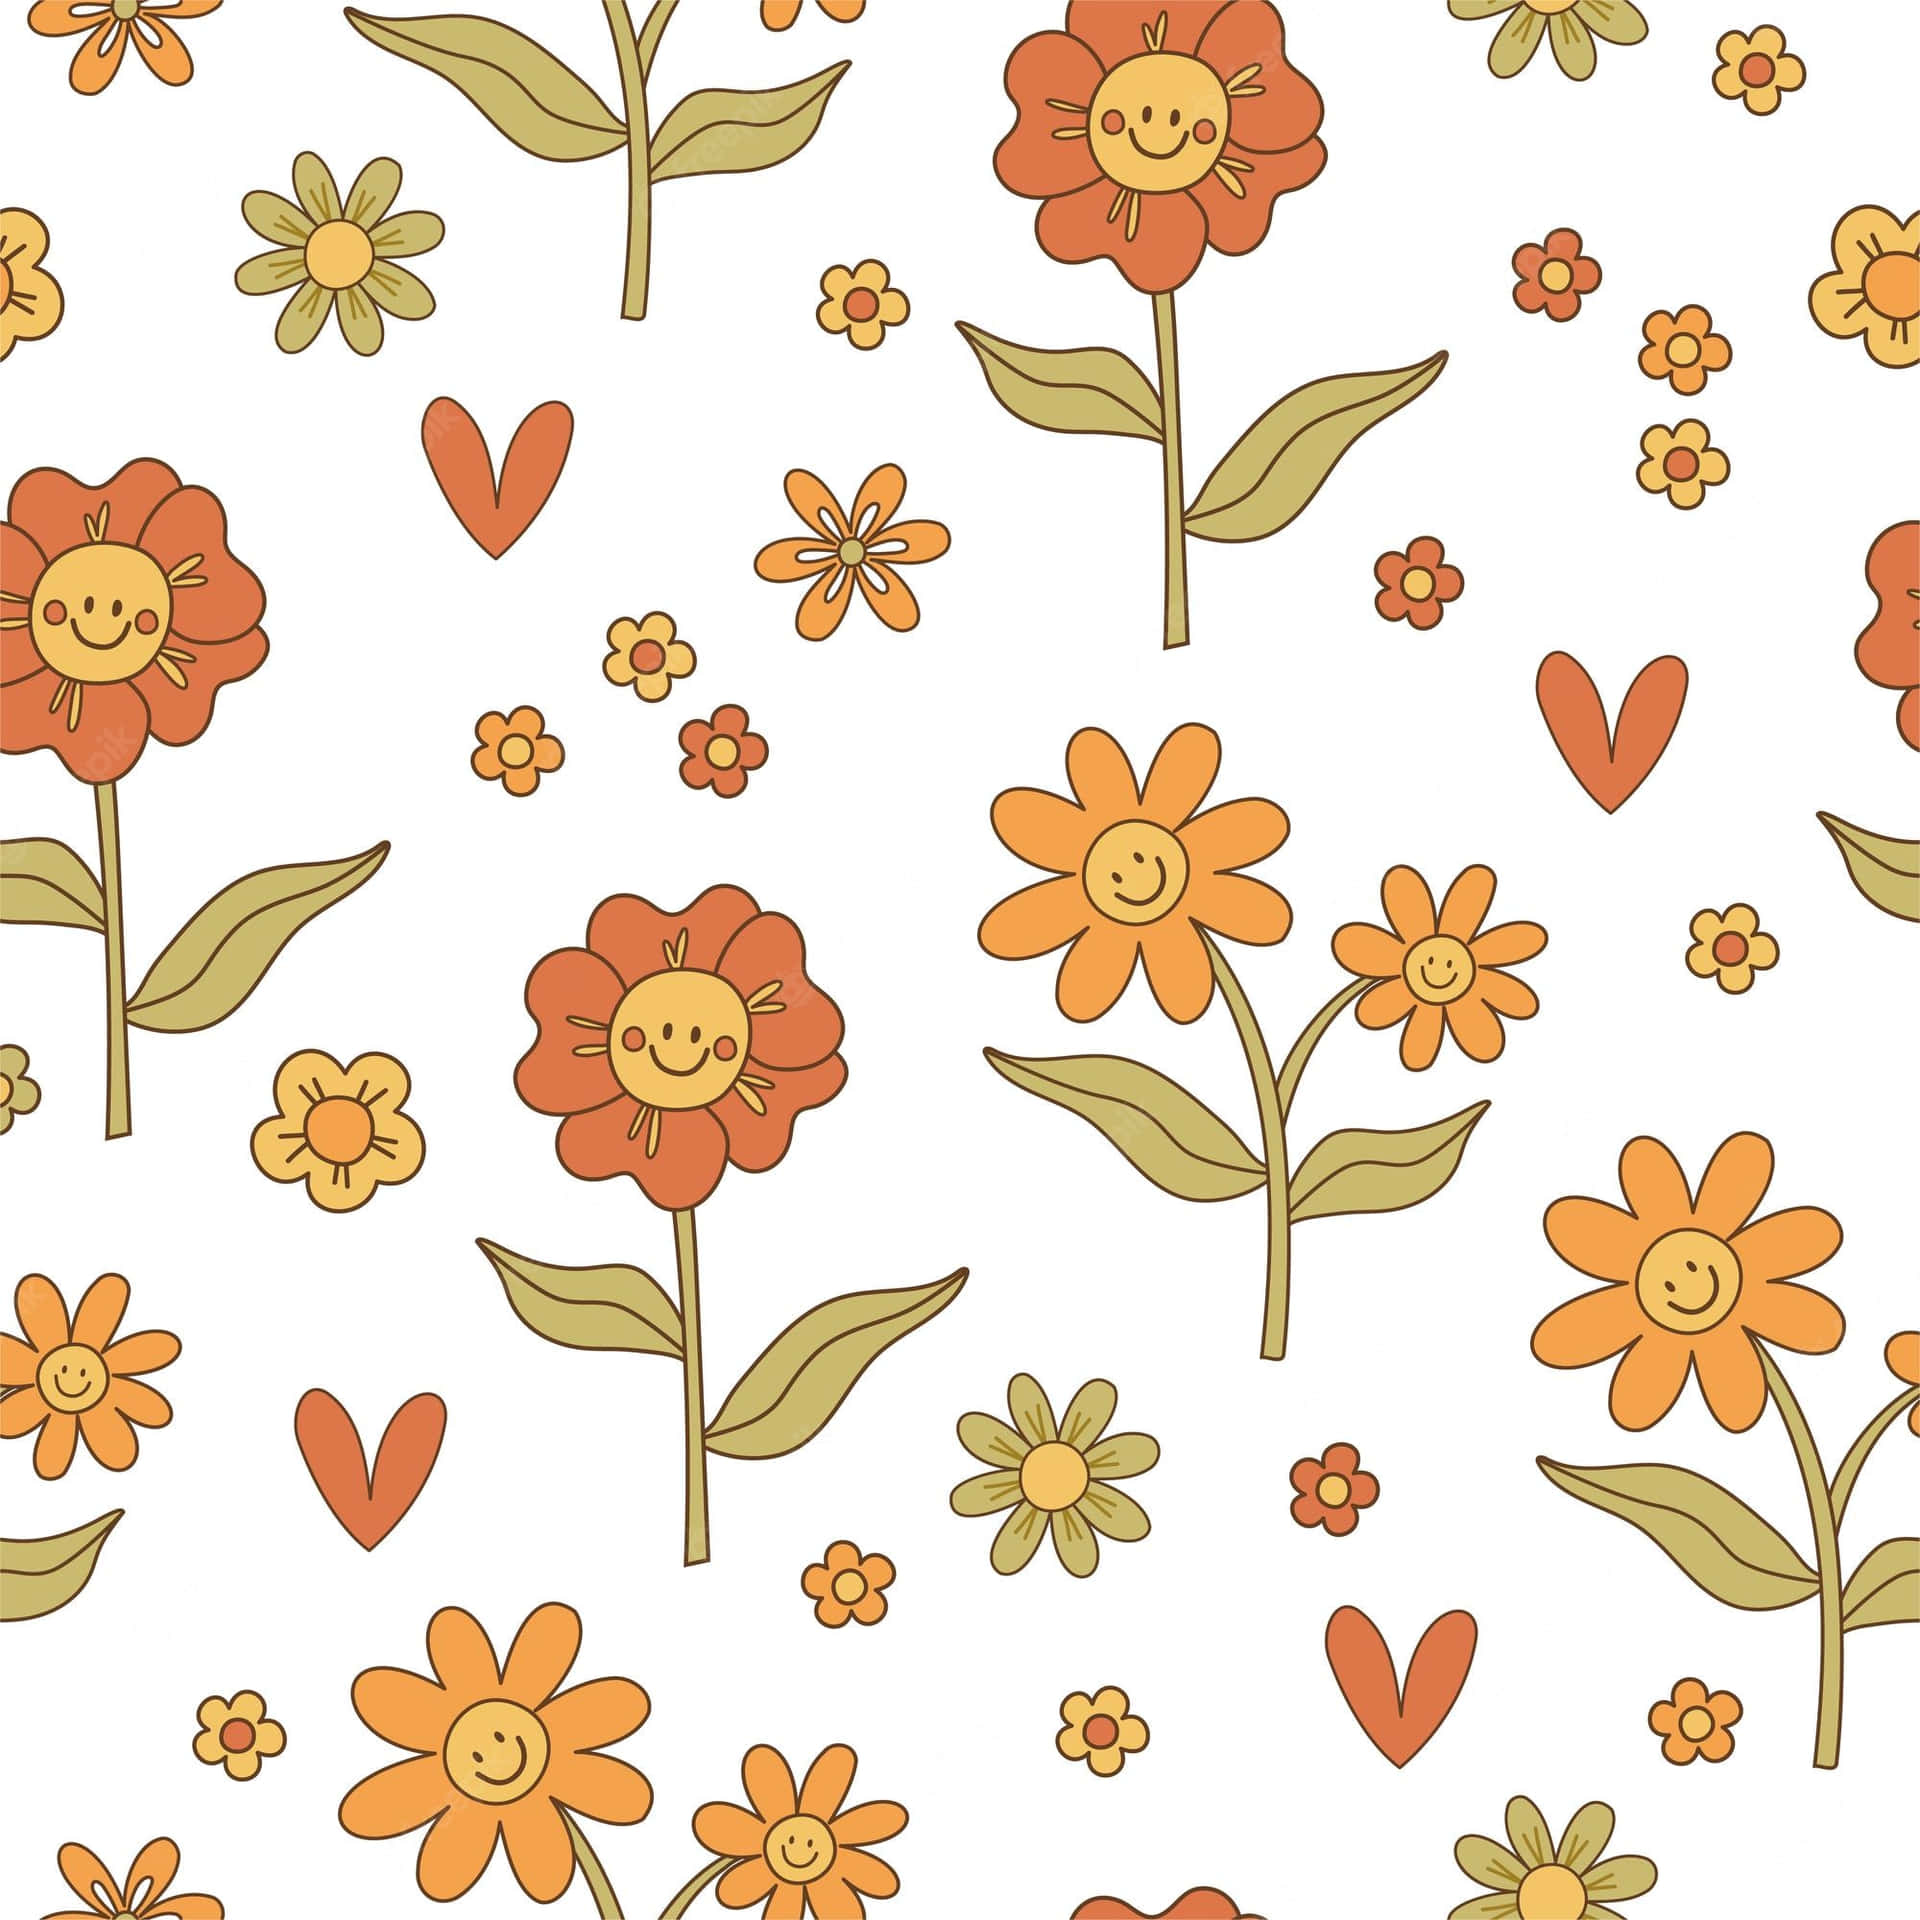 A Cute Flower Pattern With Smiley Faces And Hearts Wallpaper